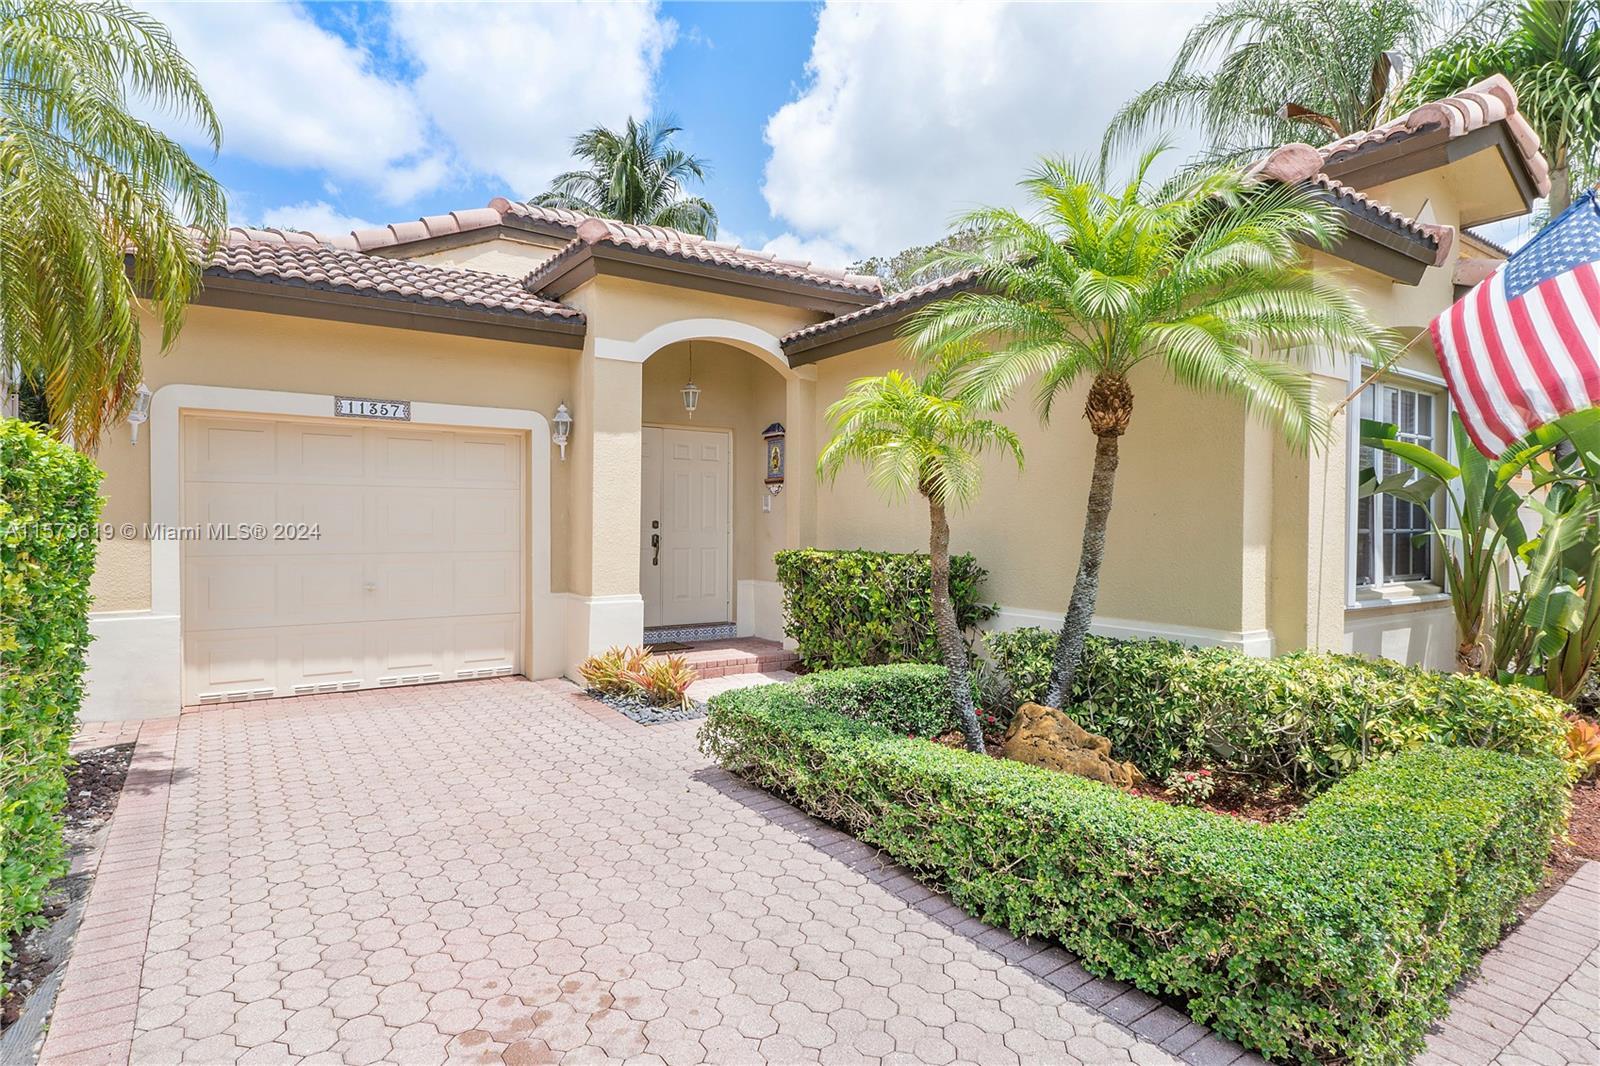 Come and see this beautifully maintained highly sought after home in Doral Landings East.  This home